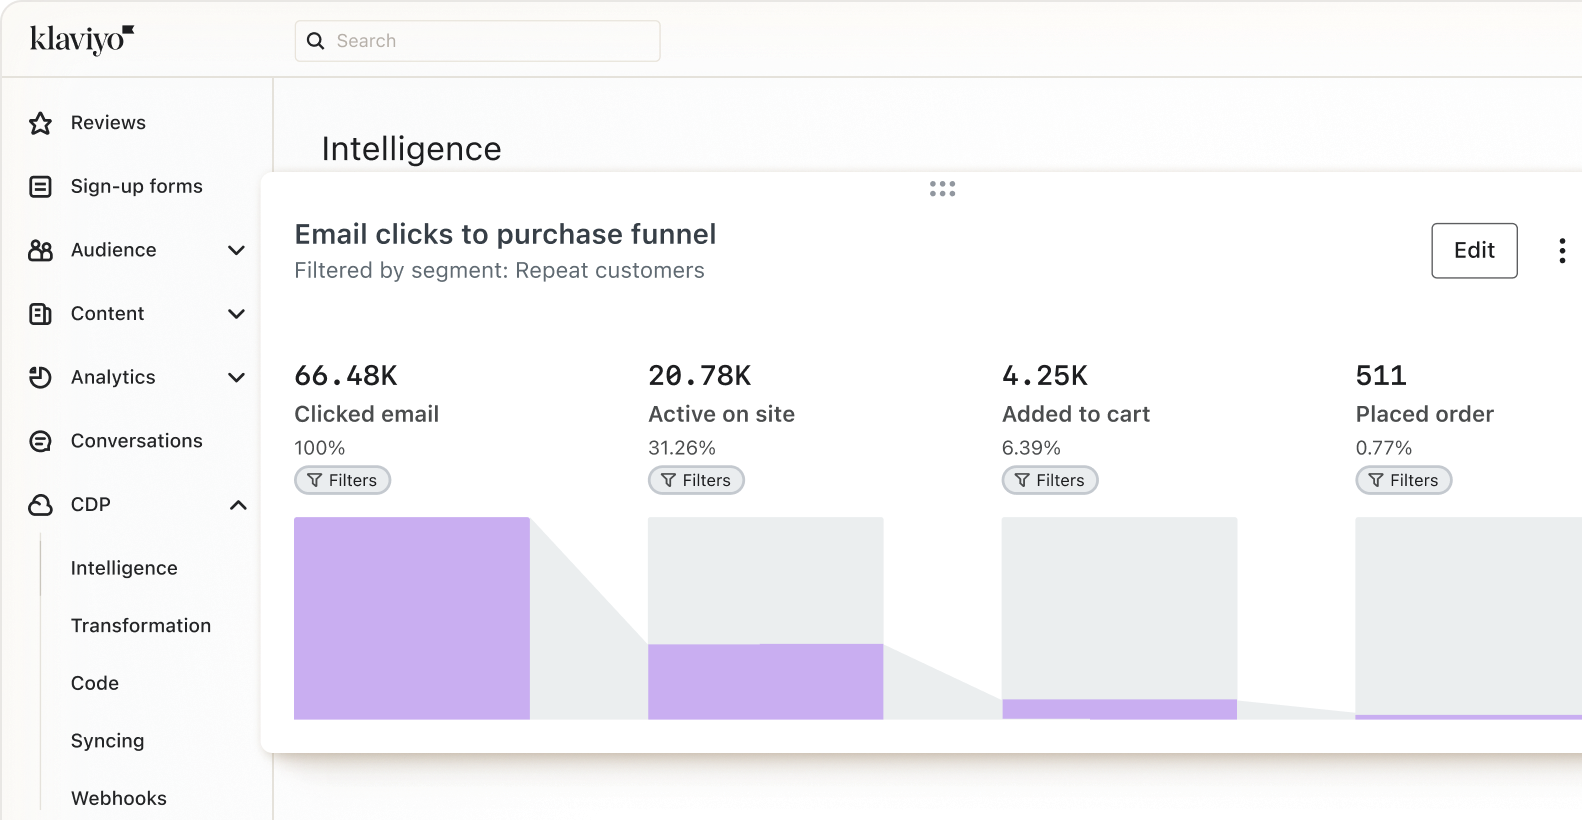 Klaviyo CDP interface, with navigation for Intelligence, Transformation, Code, Syncing, and Webhooks. A chart: “Email clicks to purchase funnel”